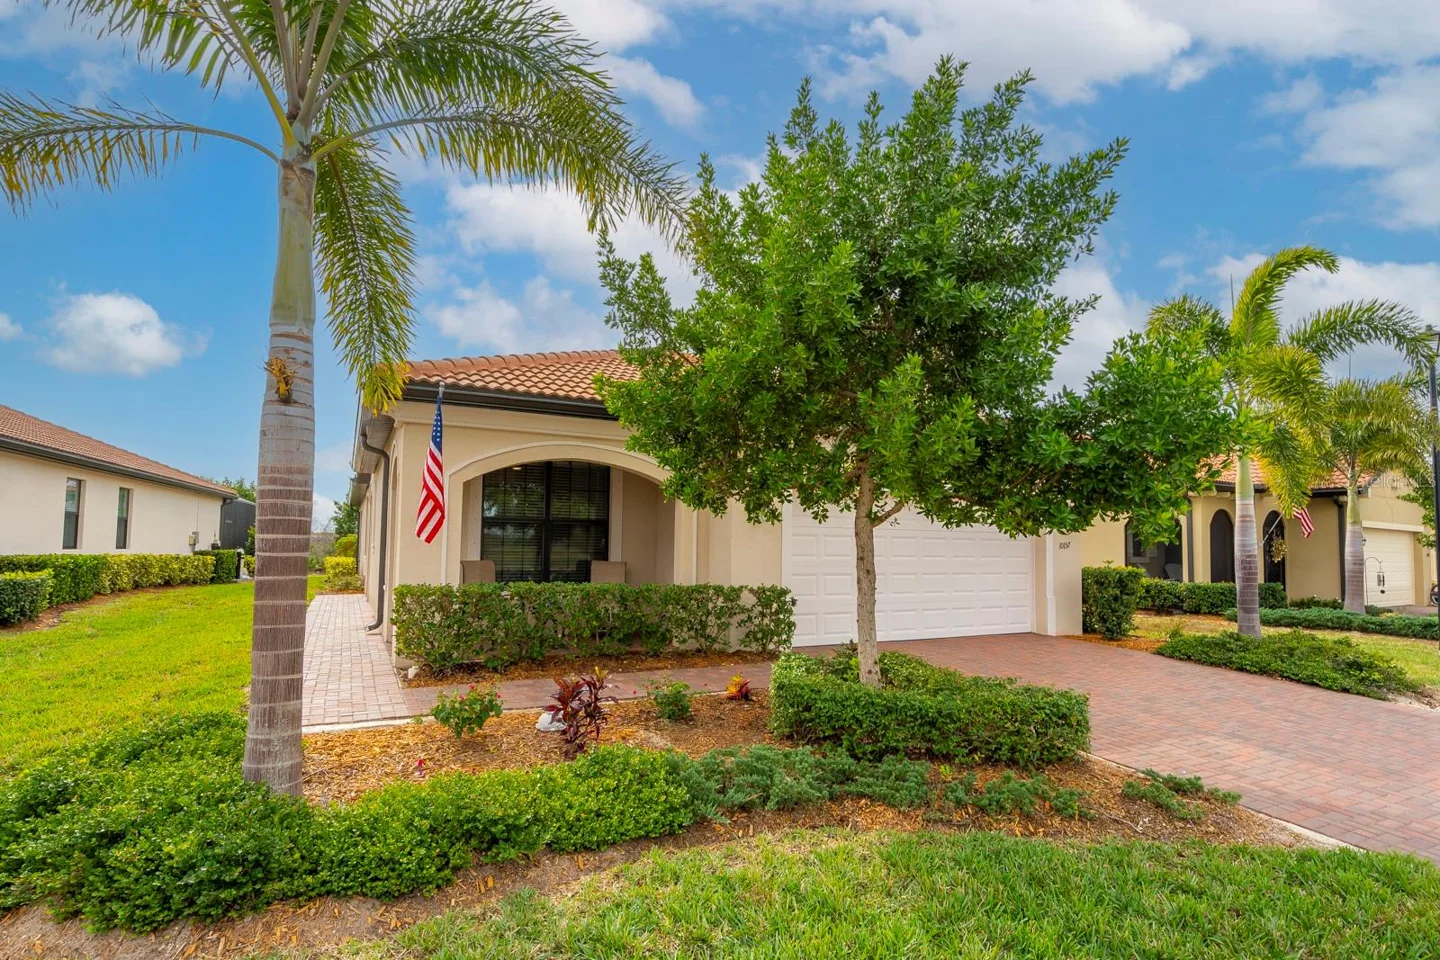 Welcome to the Roma model, situated within Sarasota National